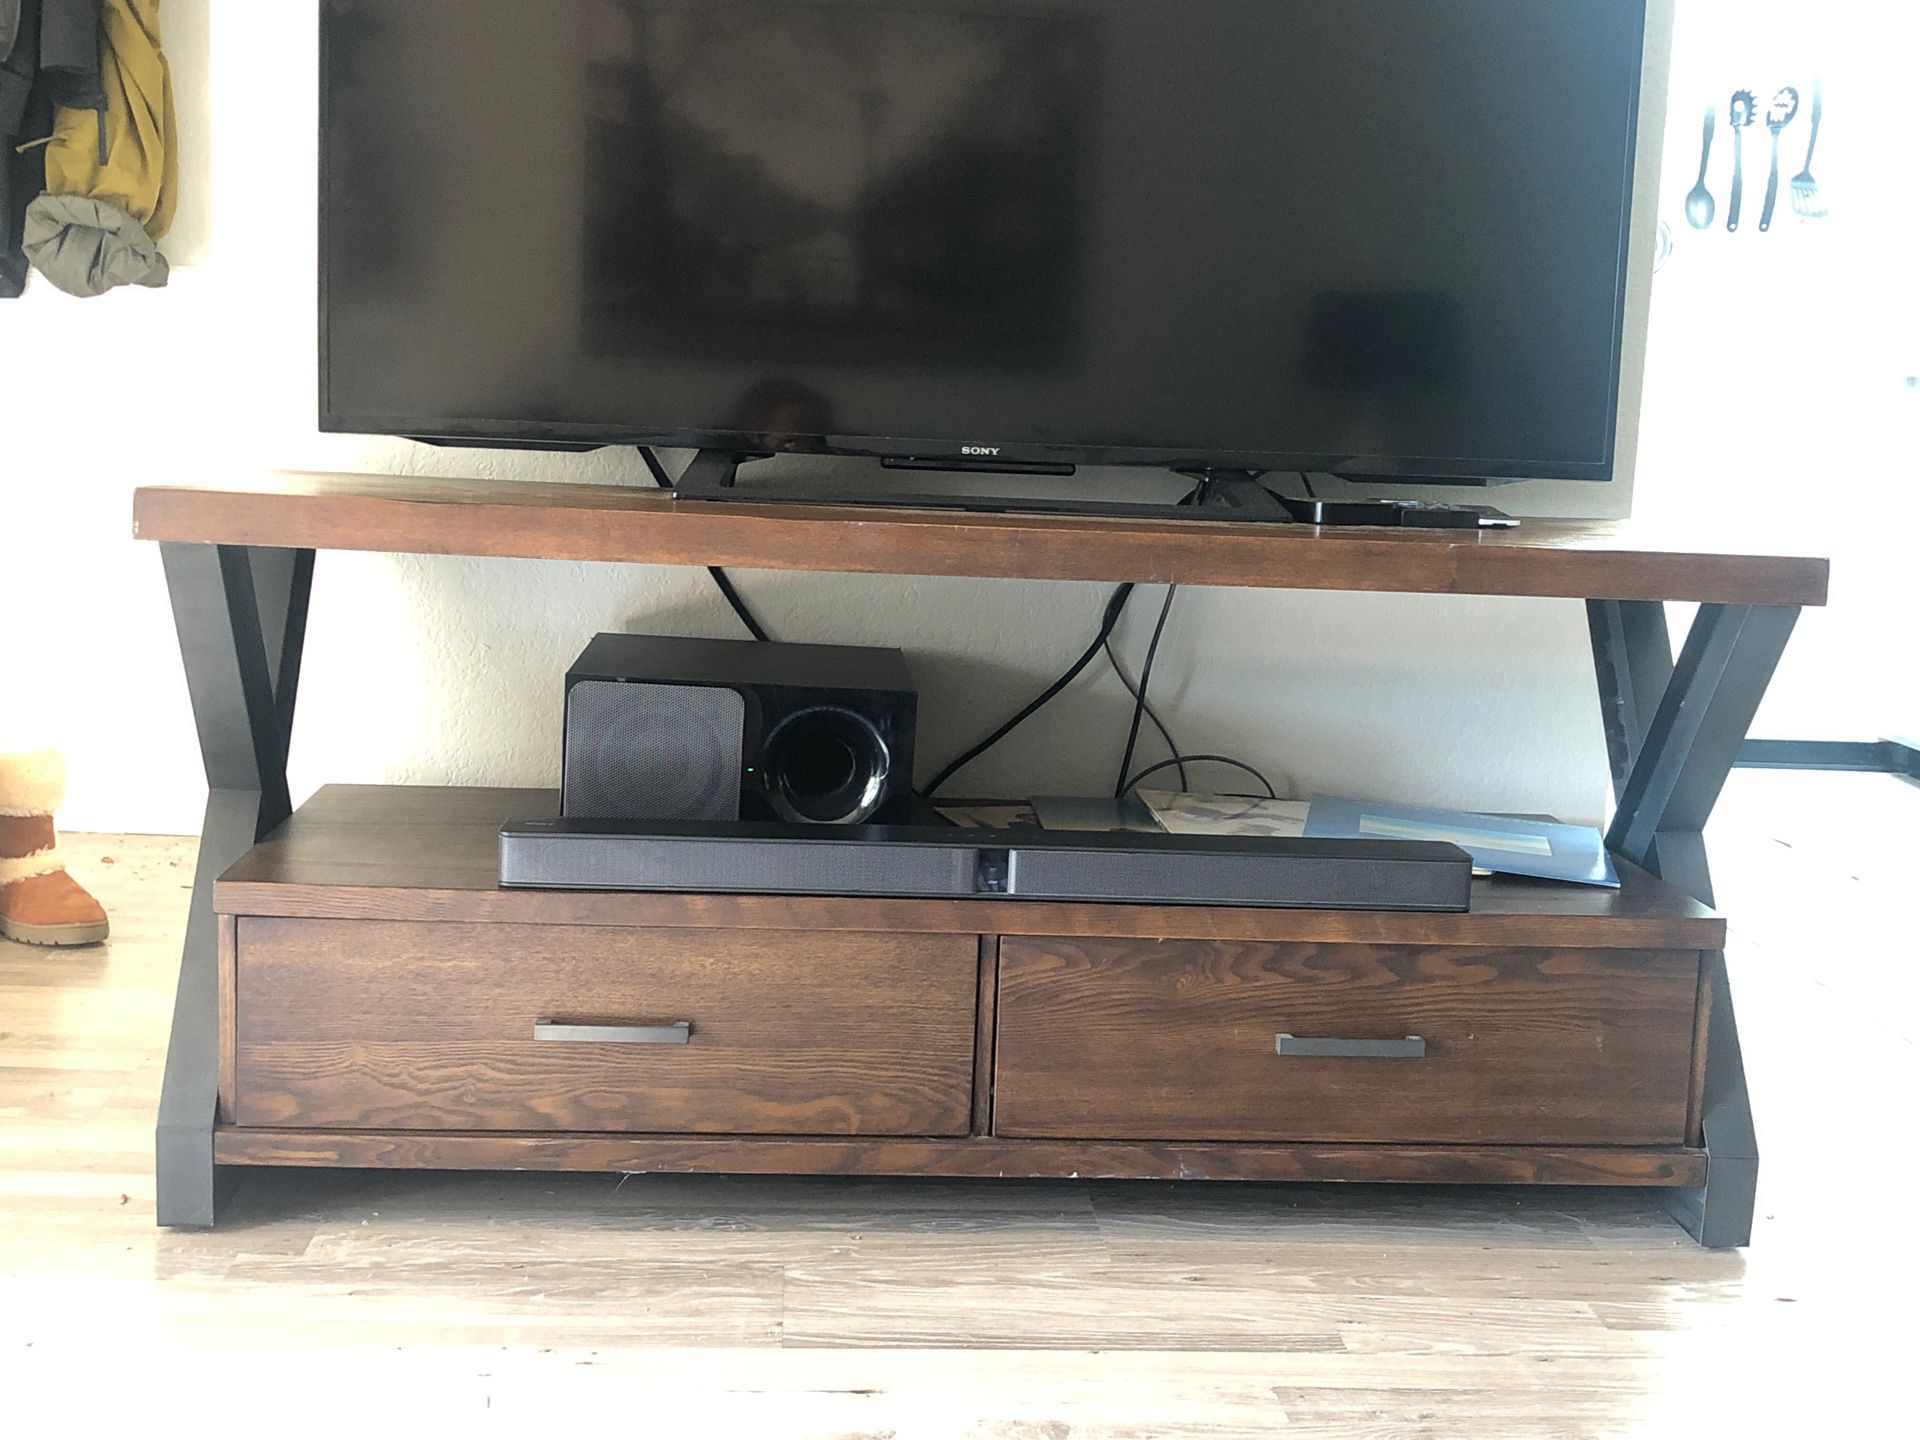 TV Stand with drawers - Super durable and great condition!